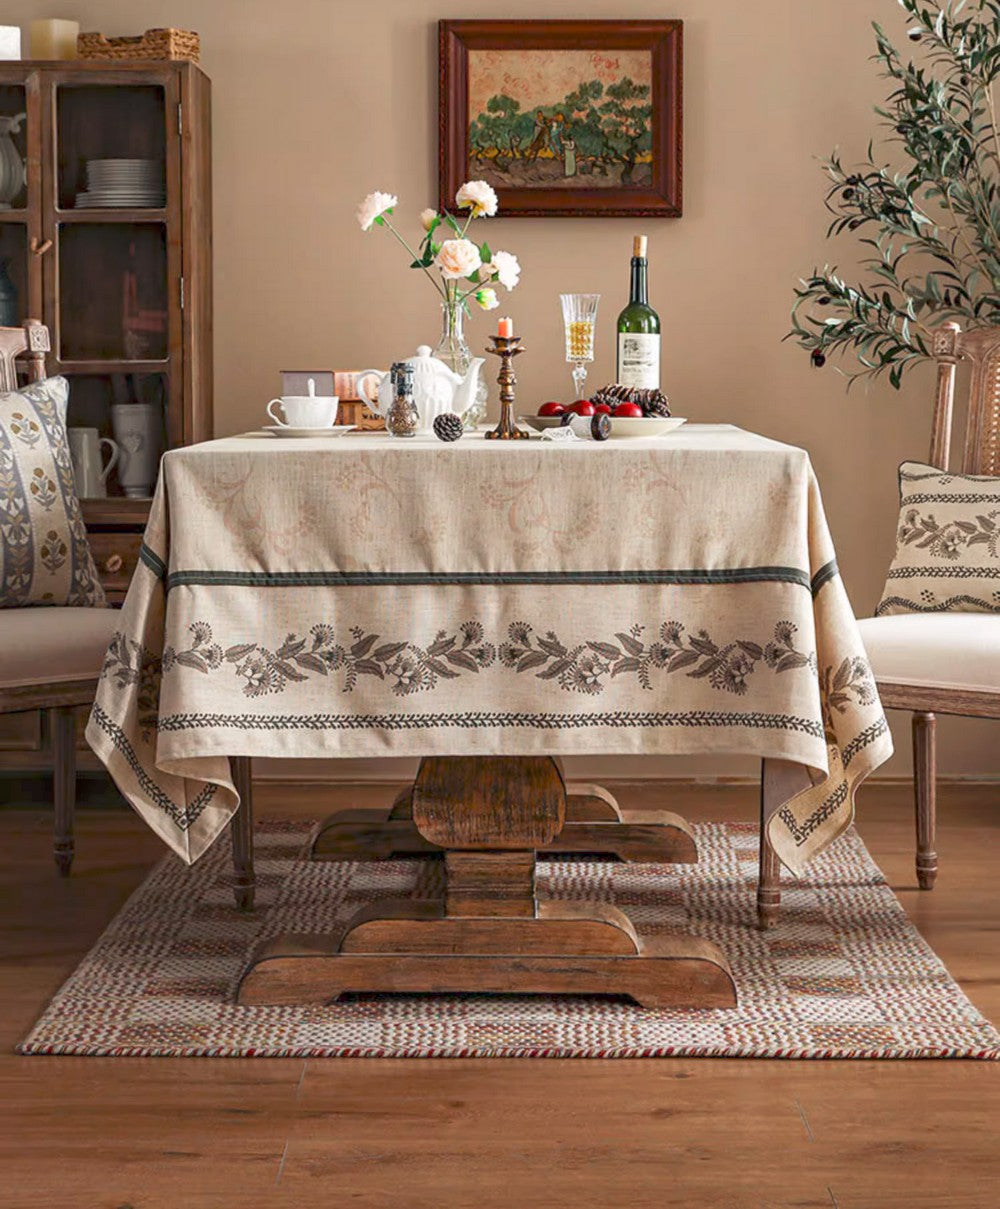 Modern Rectangle Tablecloth Ideas for Dining Table, Simple Linen Farmhouse Table Cloth, Square Linen Tablecloth for Round Dining Room Table